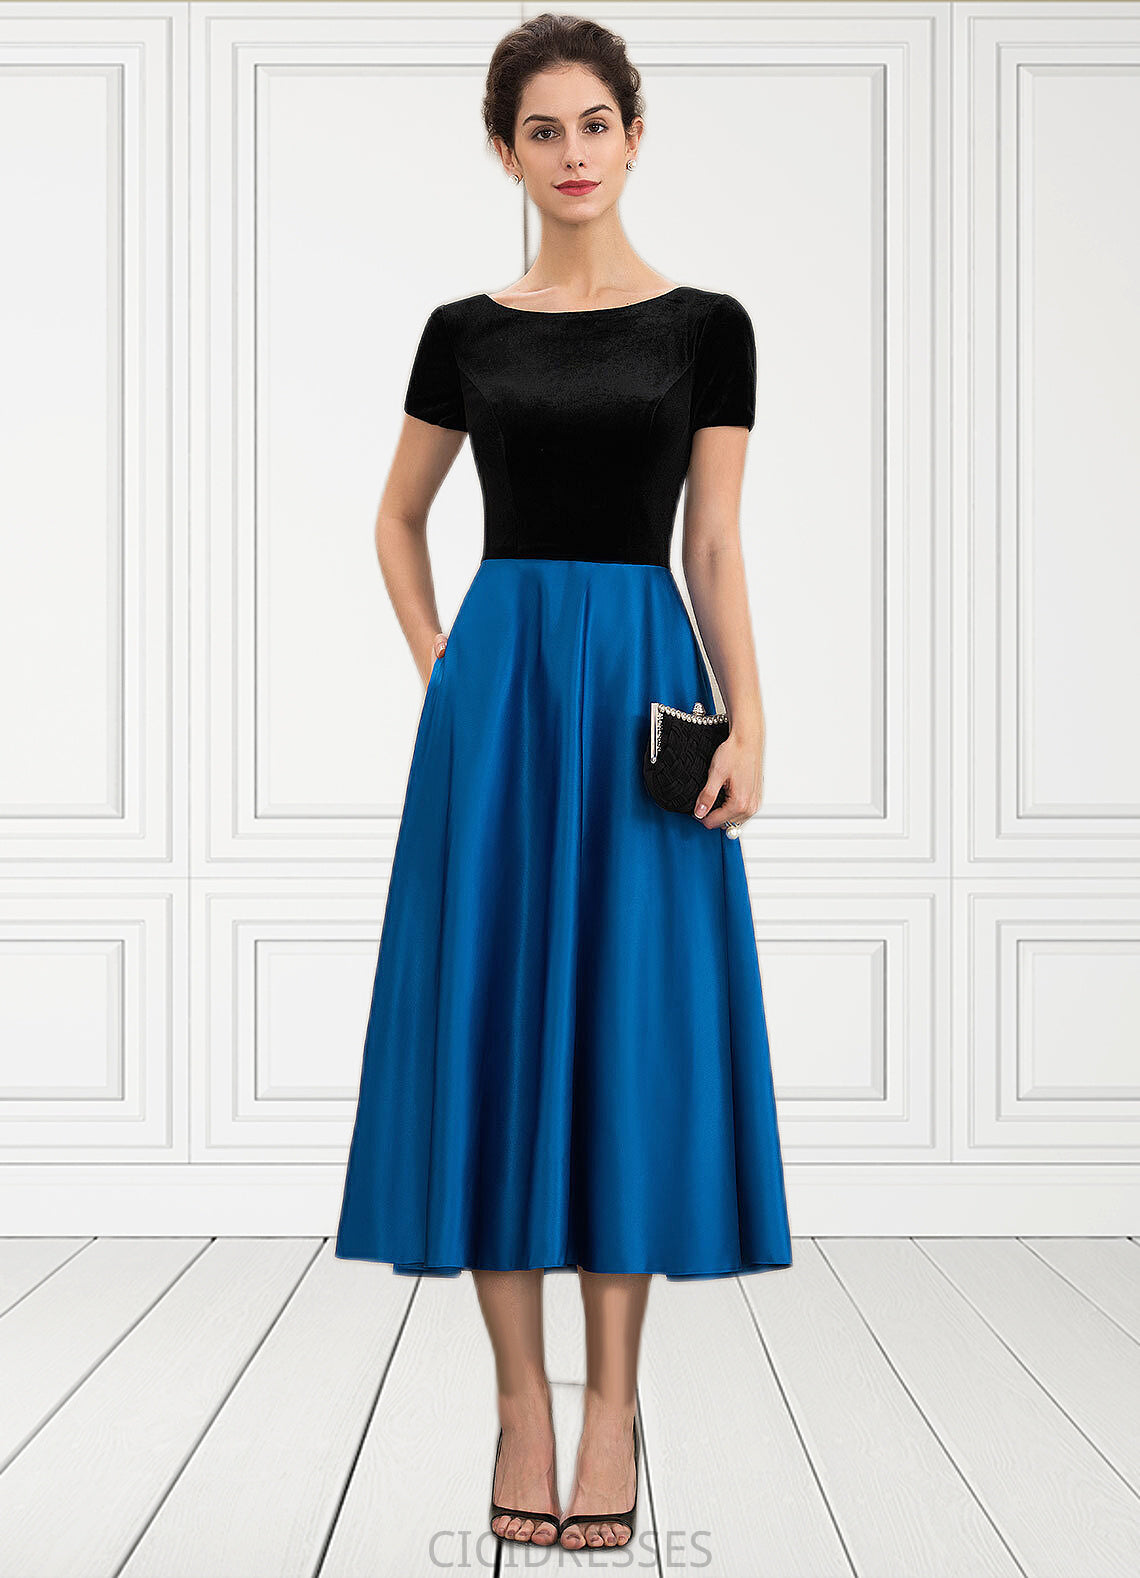 Hillary A-Line Scoop Neck Tea-Length Satin Velvet Mother of the Bride Dress With Pockets CIC8126P0014950